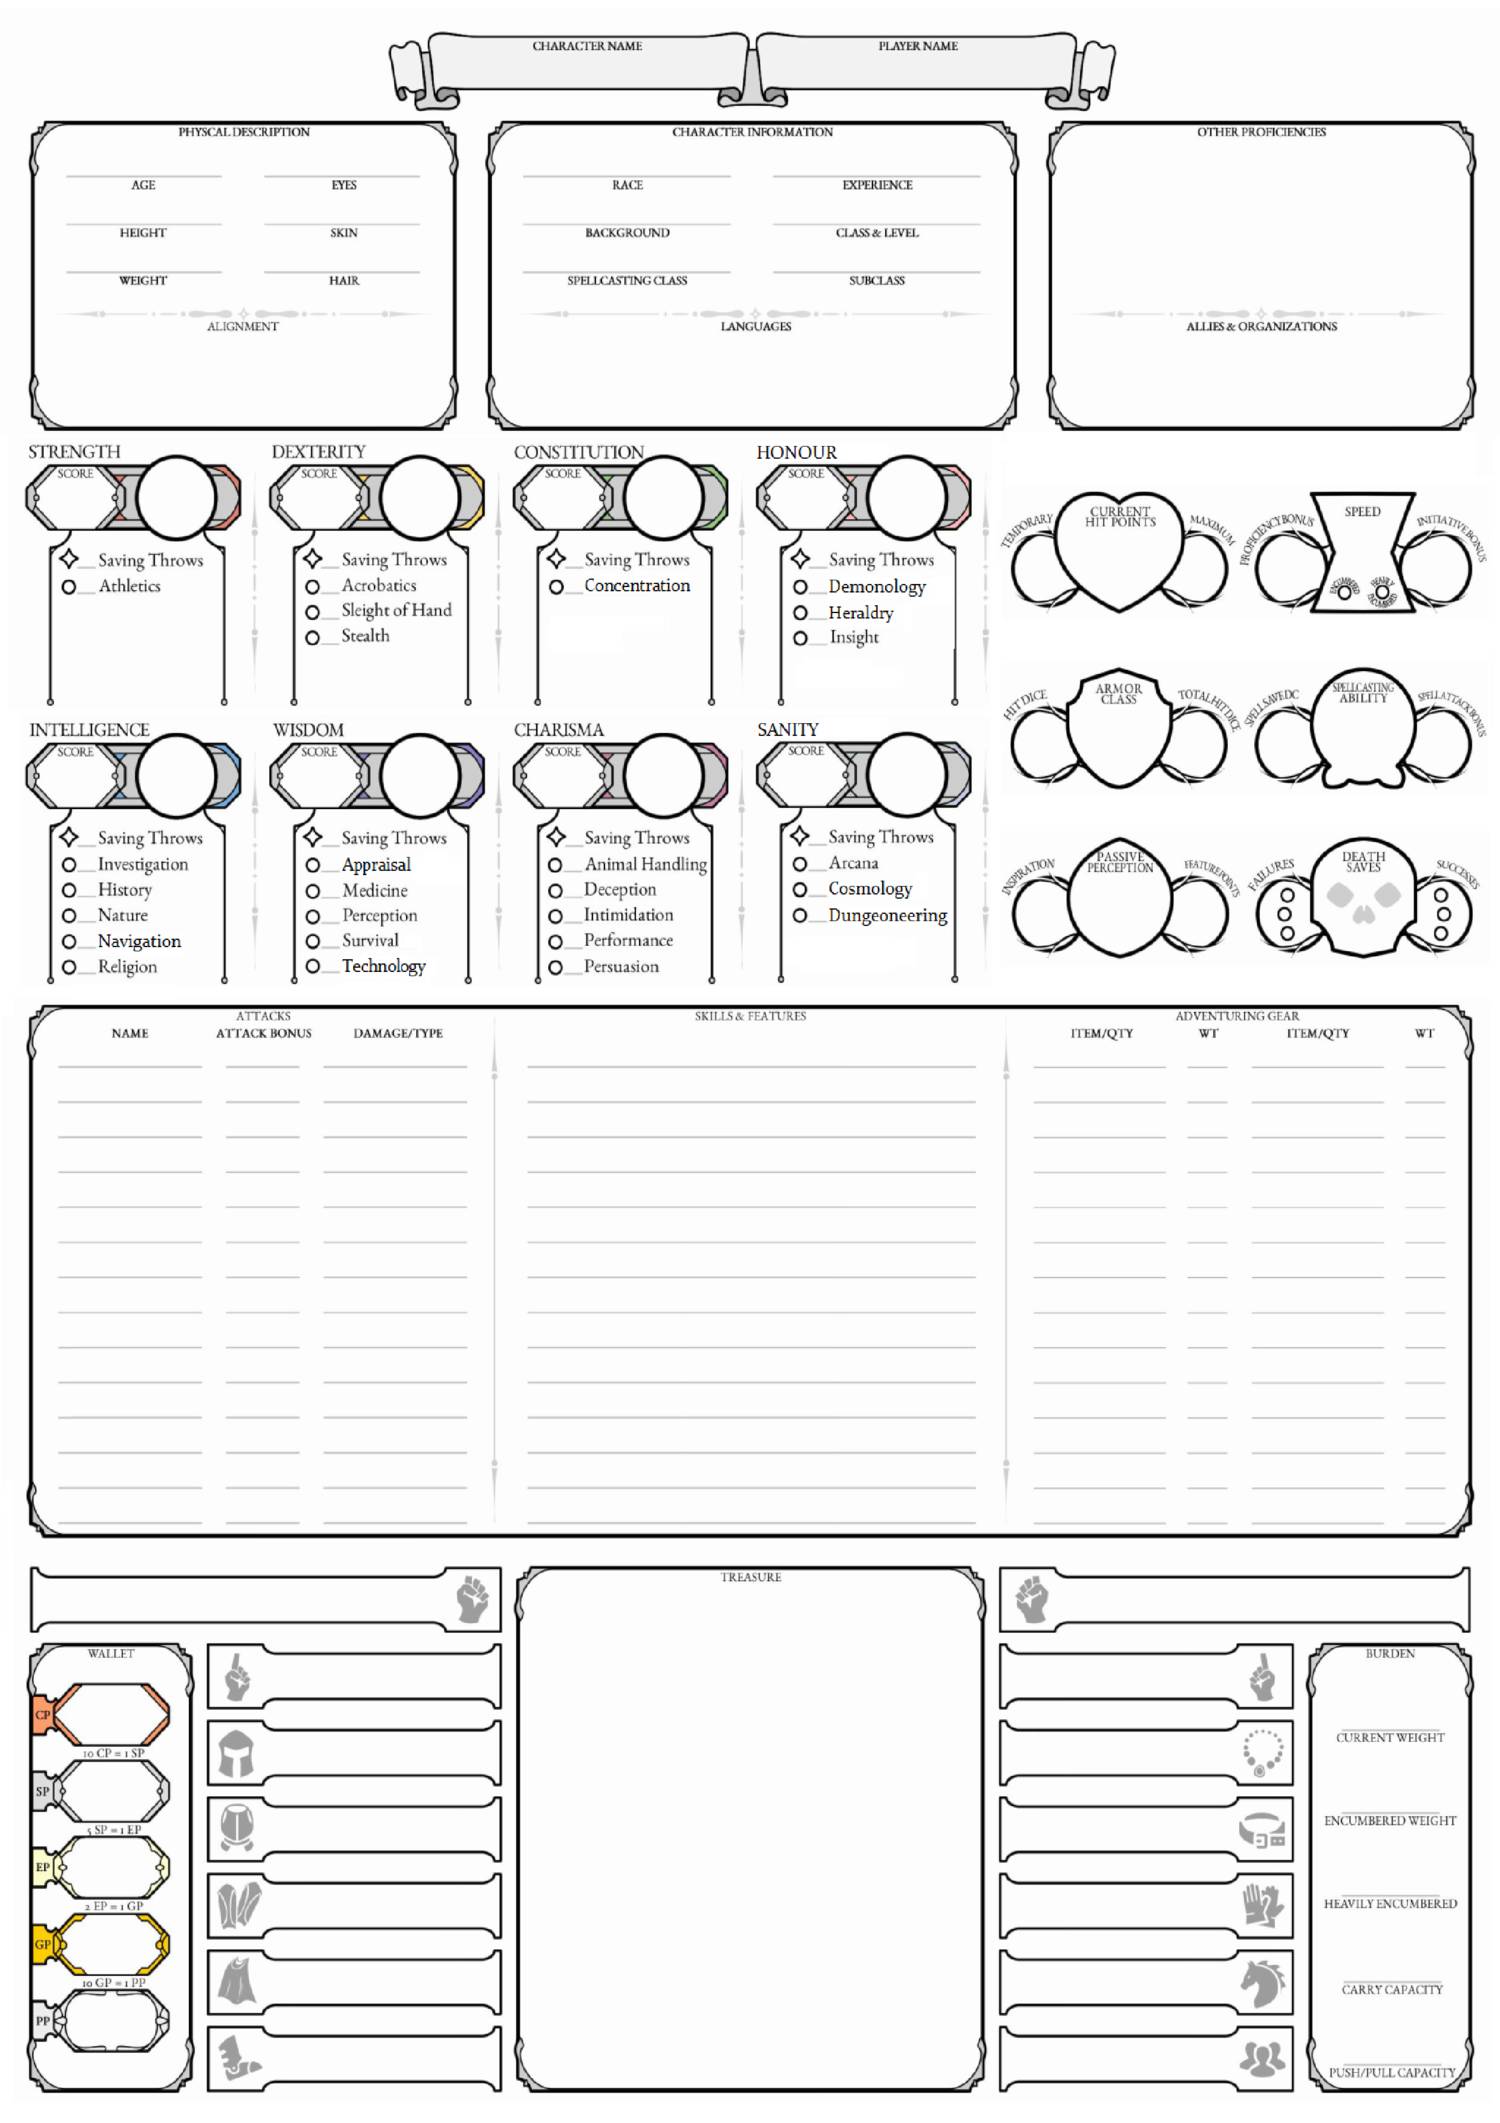 character sheet.pdf DocDroid